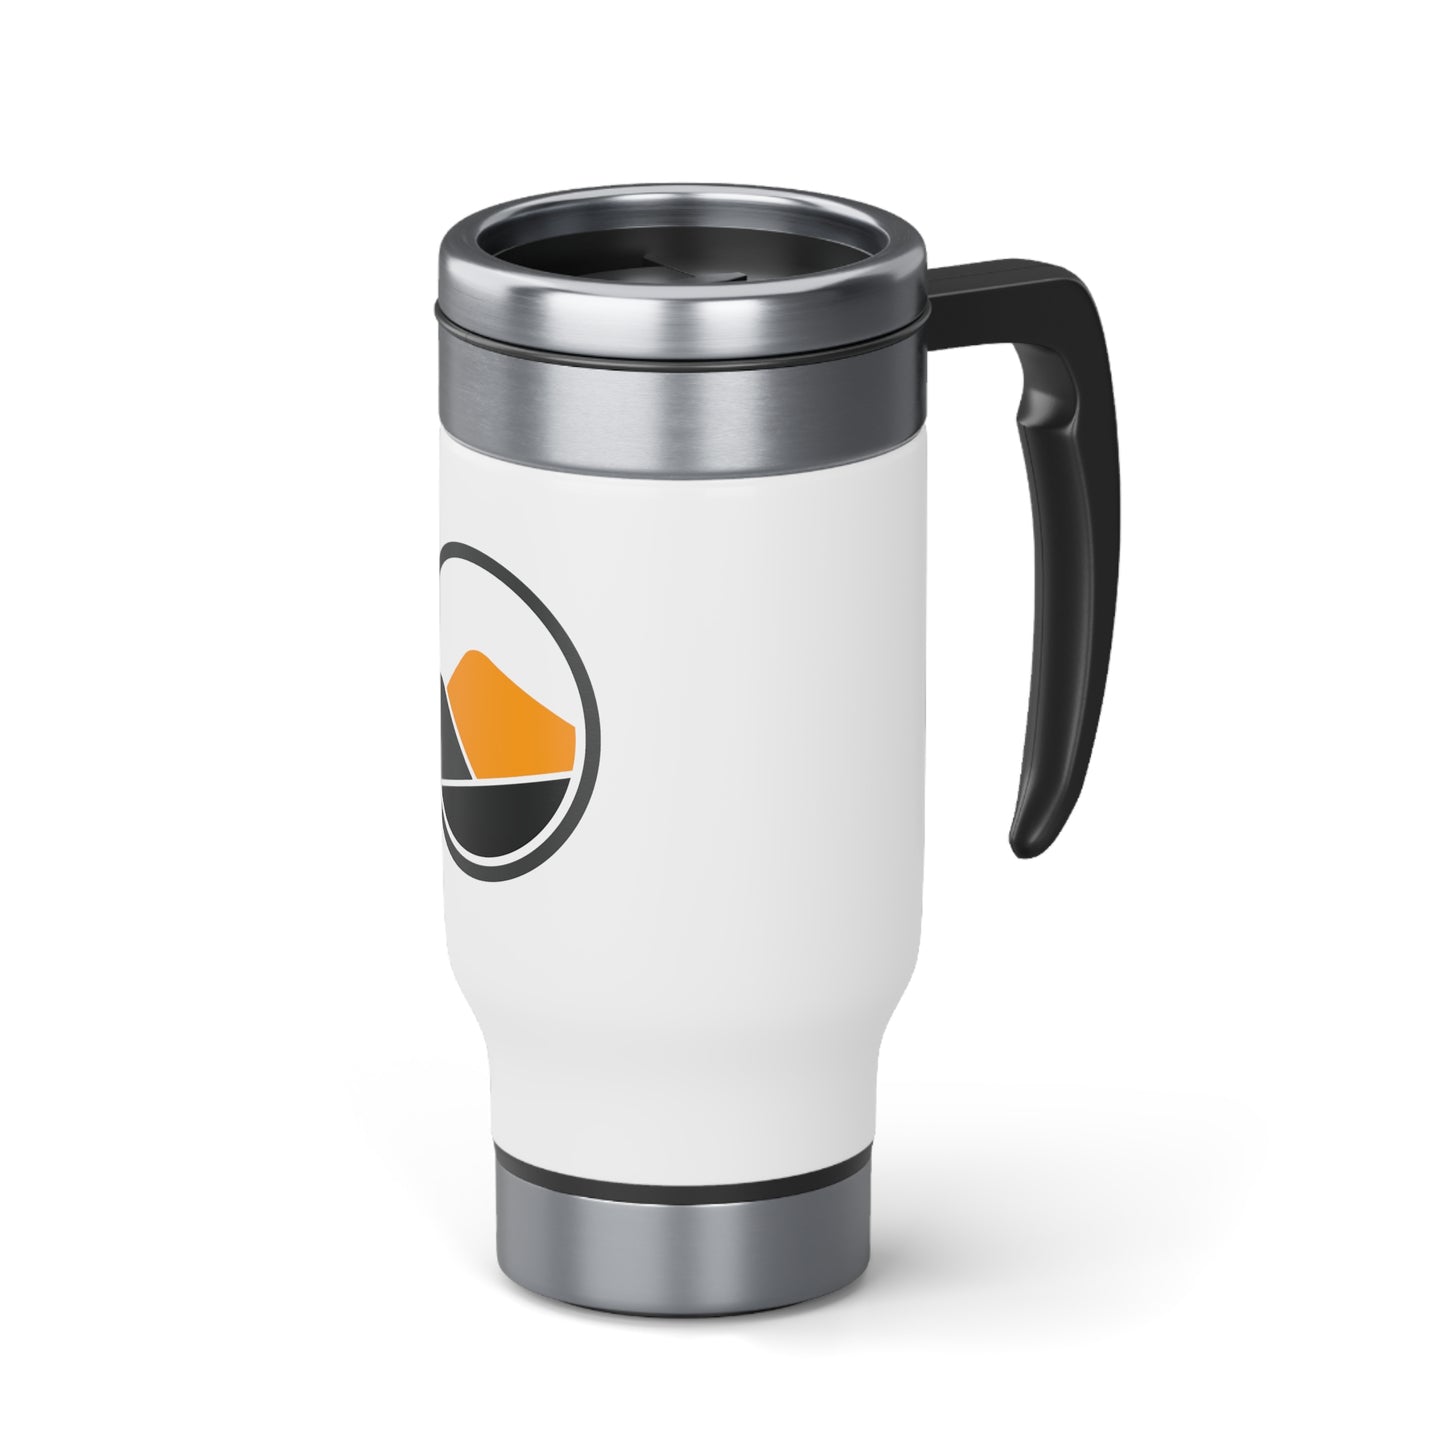 WMMBA Stainless Steel Travel Mug with Handle, 14oz